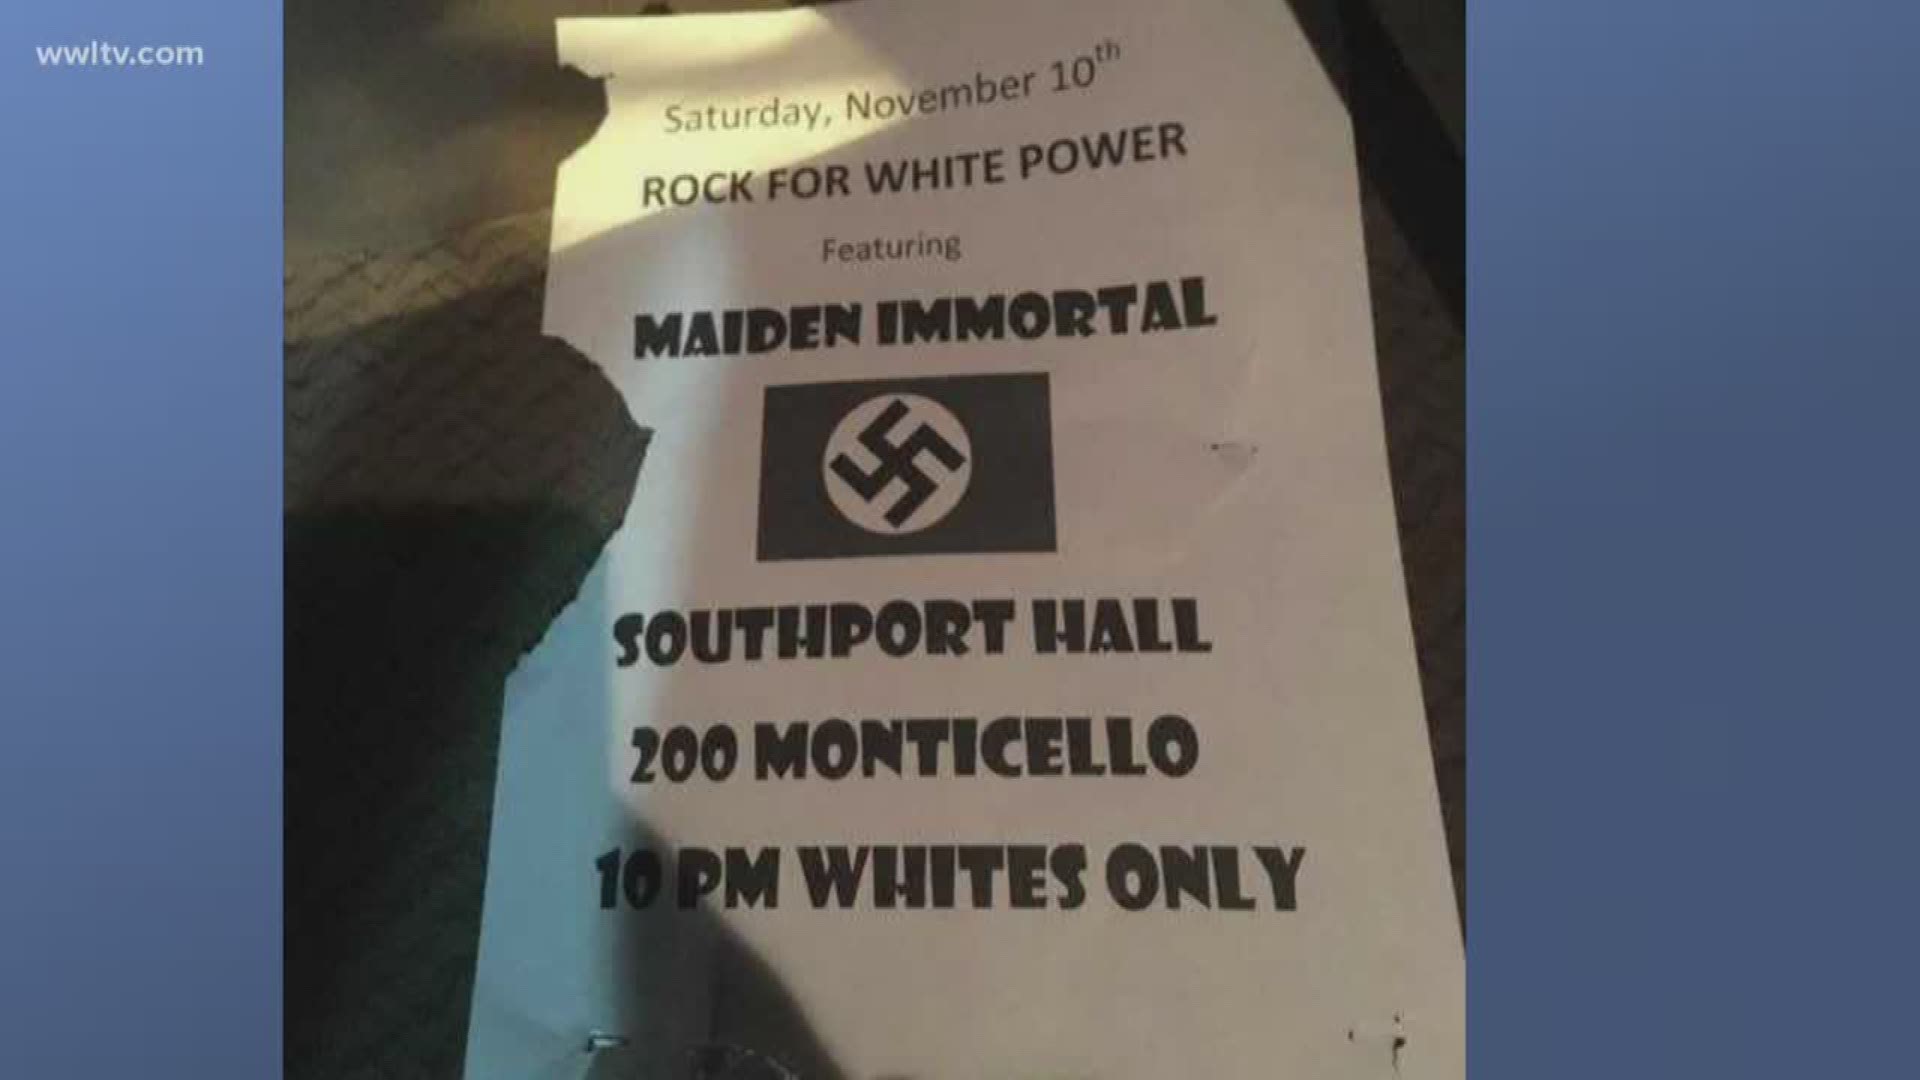 Venue managers and band members say they are not responsible for the flyers asking for anyone with info. to come forward.